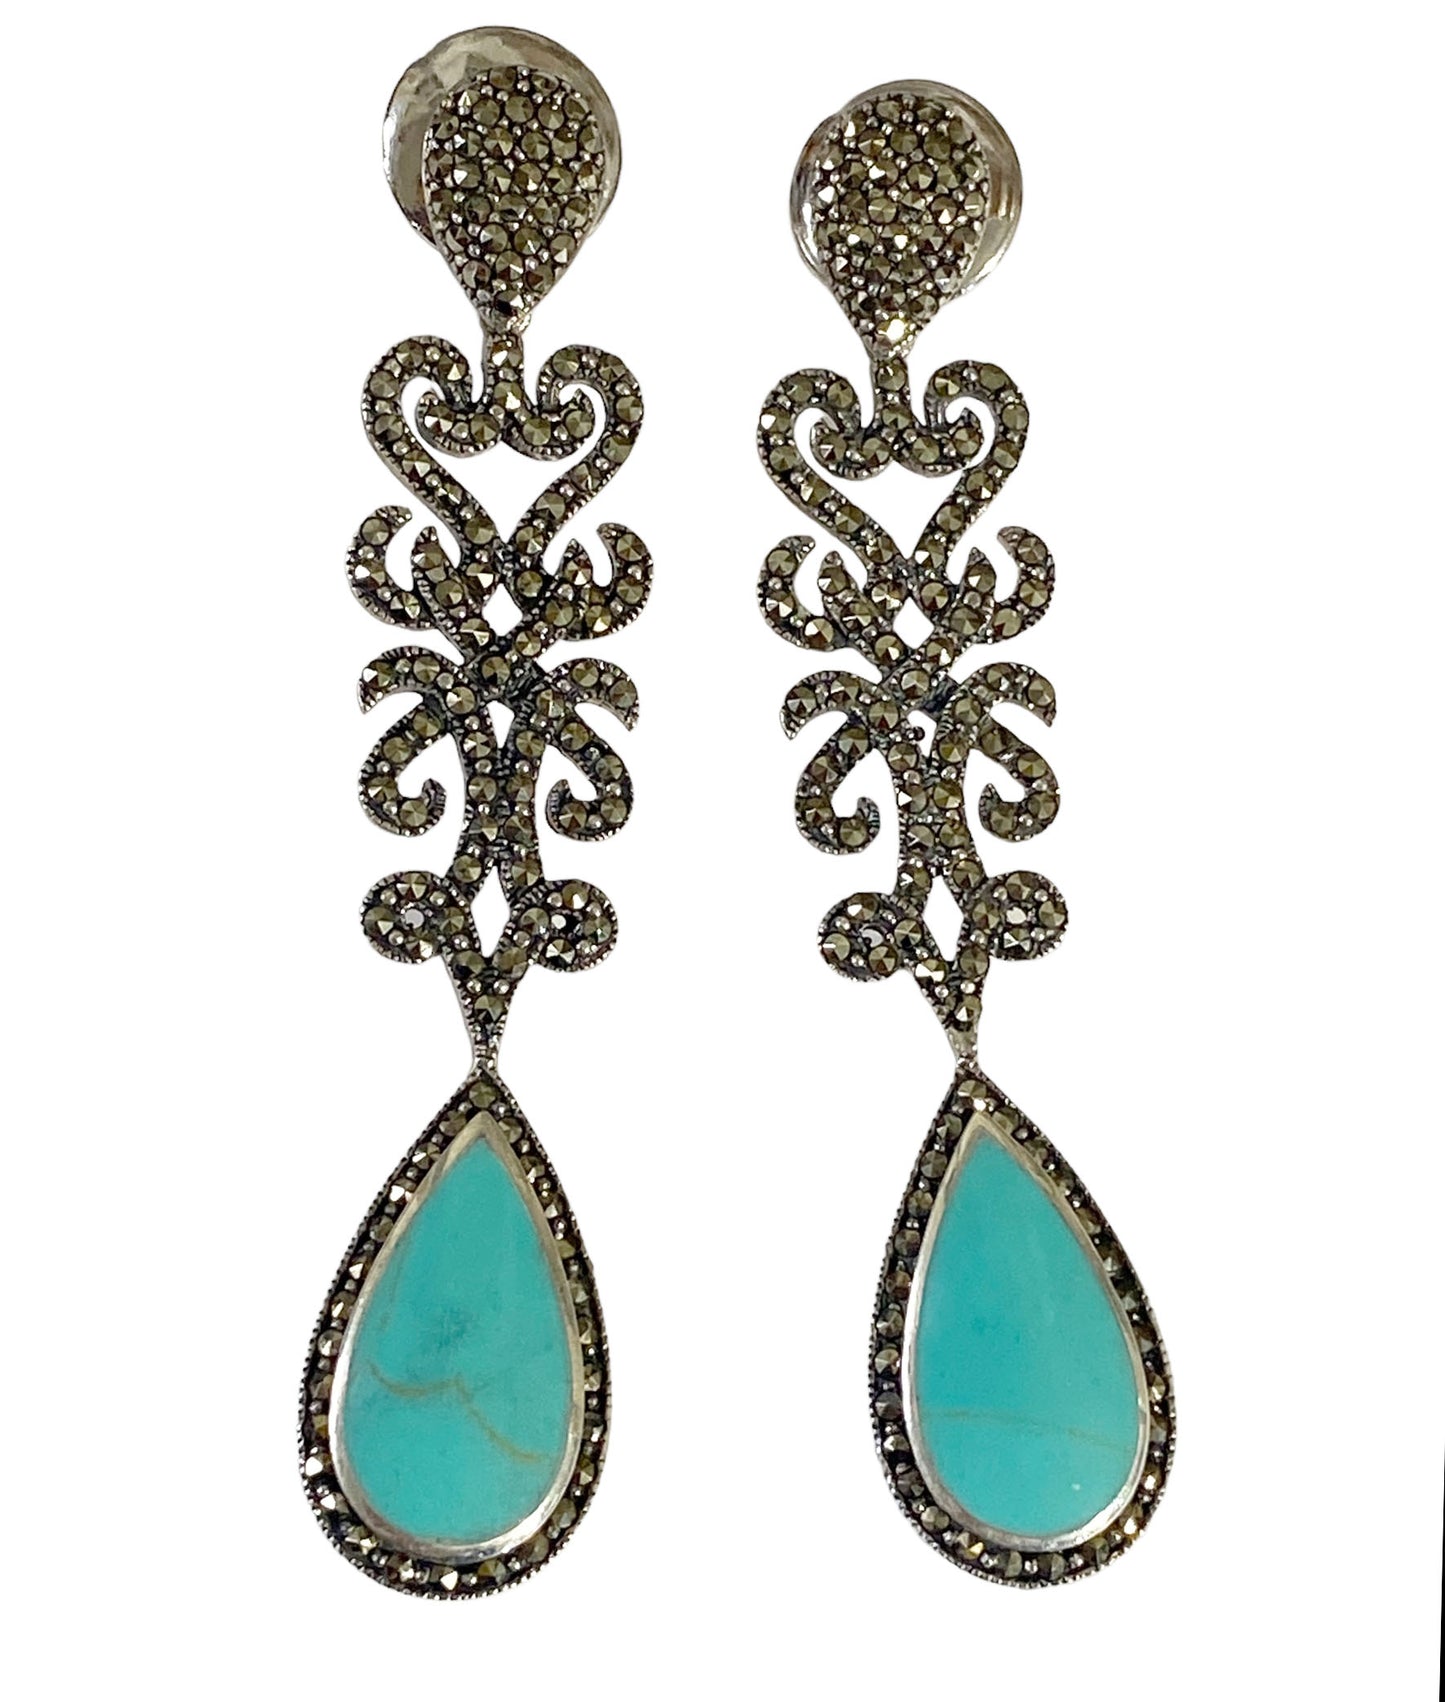 #5852 Sterling Silver And Marcasite Stud Dangle Earrings With Turquoise Stone 2.75" Long